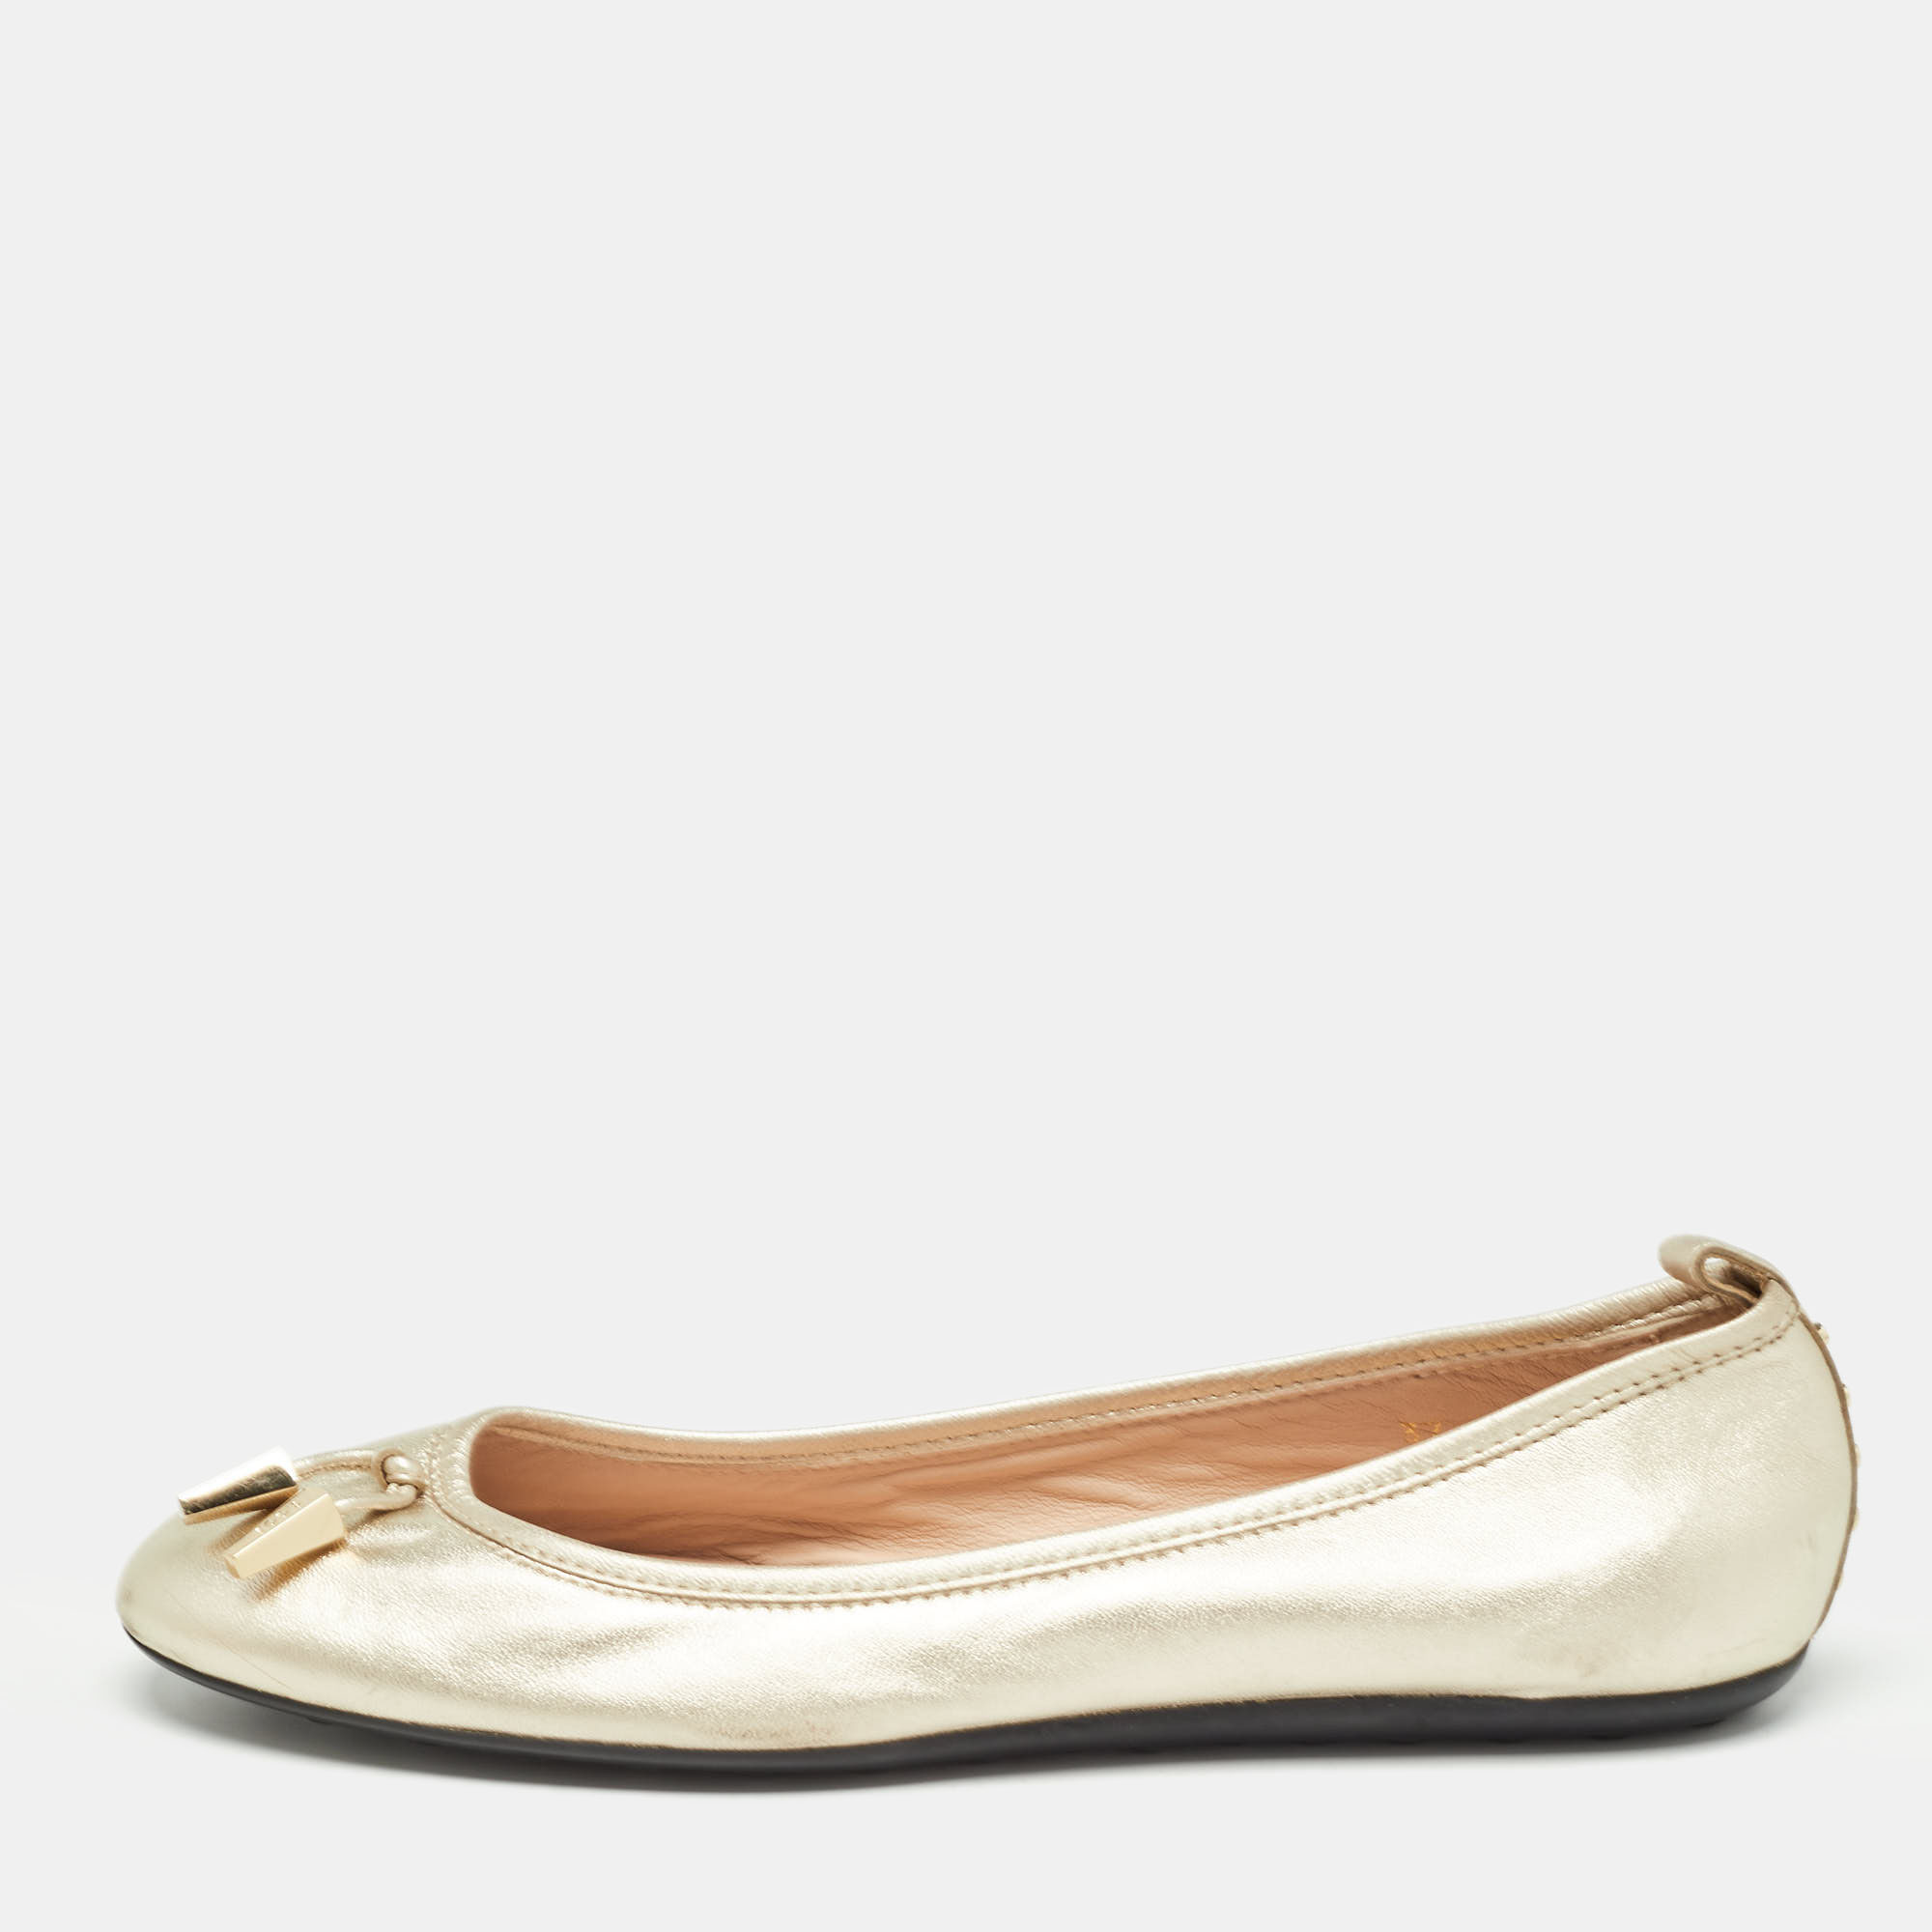 Tod's gold leather tassel ballet flats size 37